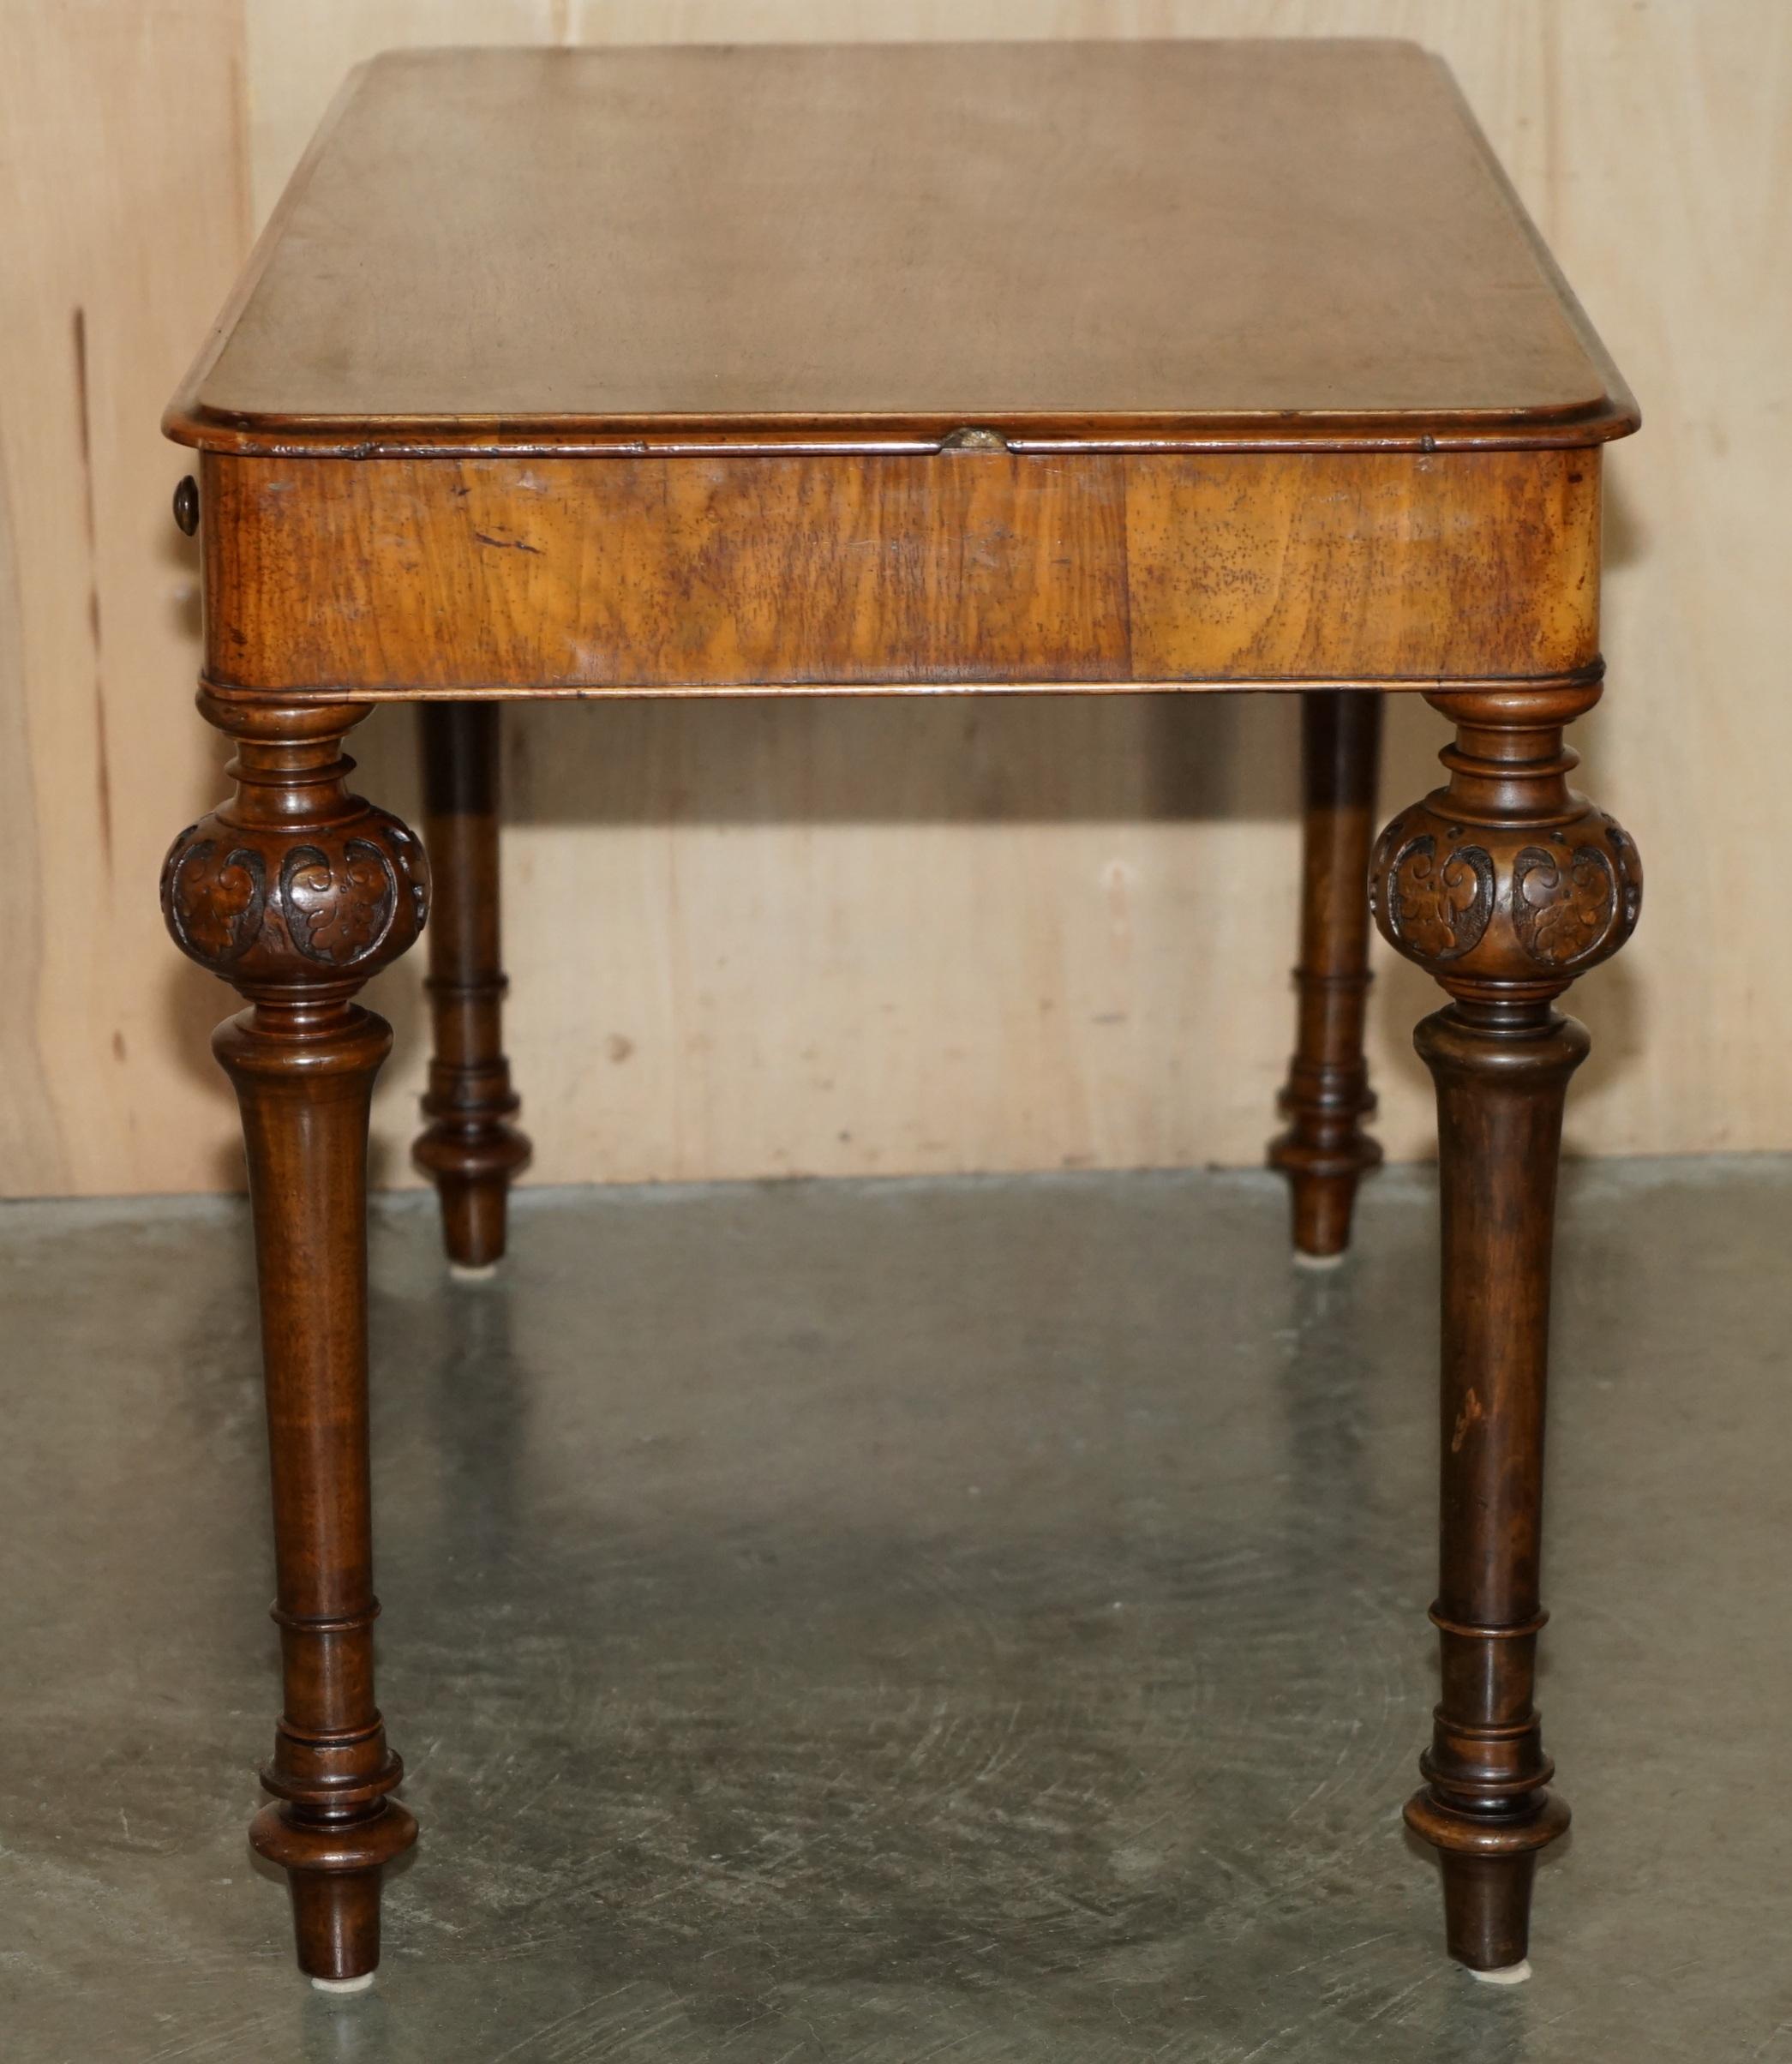 EXQUISITE SMALL WILLIAM IV CIRCA 1830 HARDWOOD WRiTING TABLE DESK CARVED LEGS For Sale 9